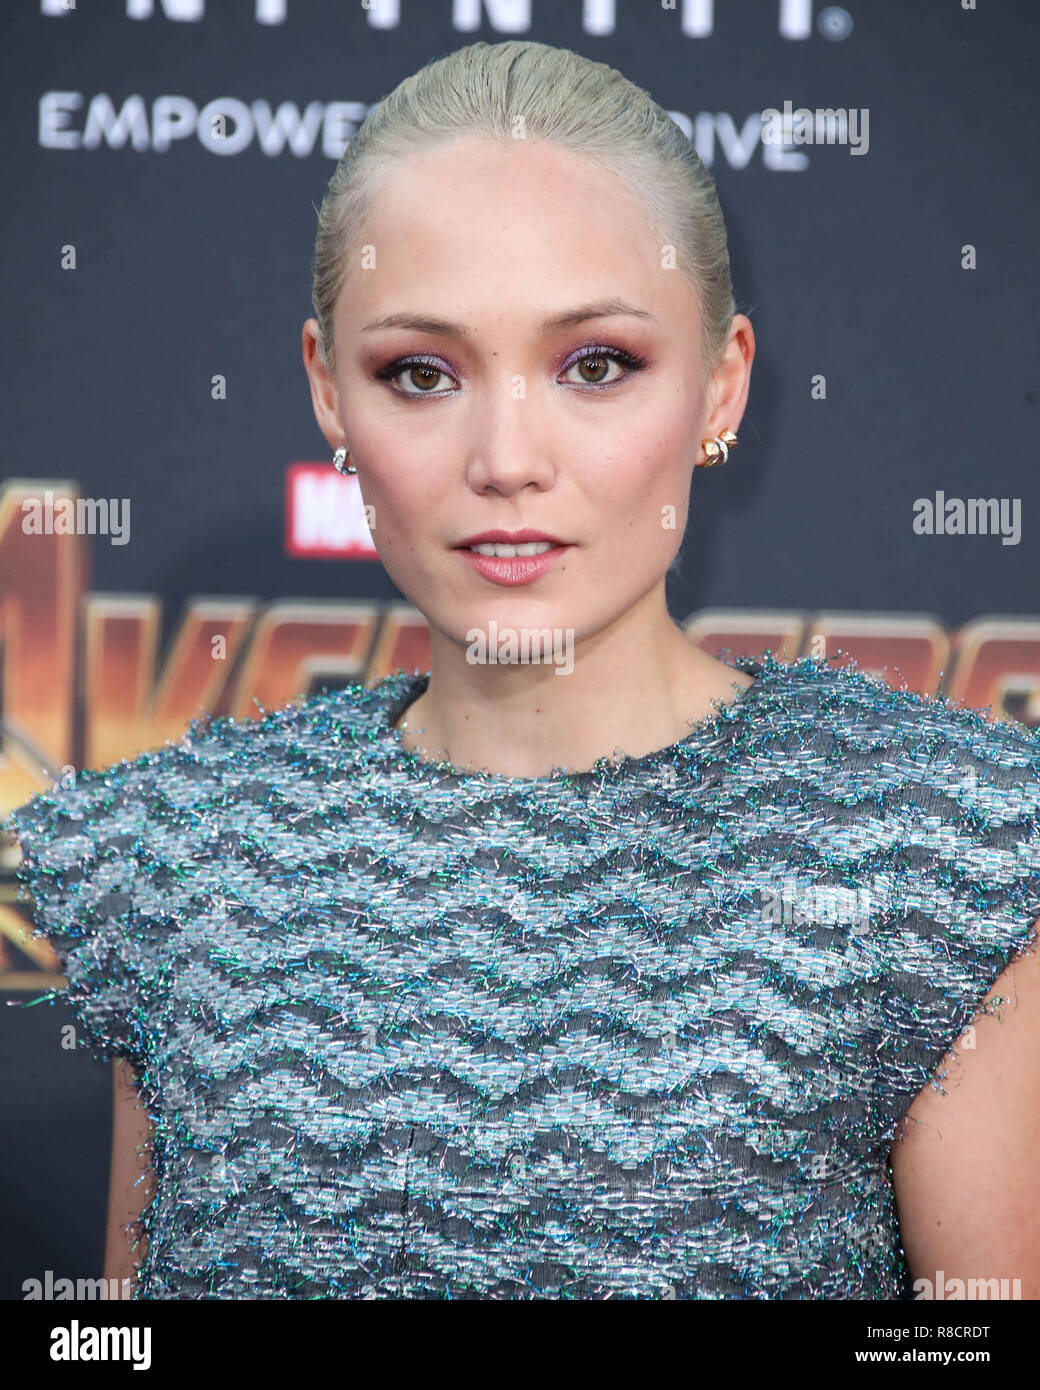 HOLLYWOOD, LOS ANGELES, CA, USA - APRIL 23: Pom Klementieff at the World Premiere Of Disney And Marvel's 'Avengers: Infinity War' held at the El Capitan Theatre, Dolby Theatre and TCL Chinese Theatre IMAX on April 23, 2018 in Hollywood, Los Angeles, California, United States. (Photo by Xavier Collin/Image Press Agency) Stock Photo